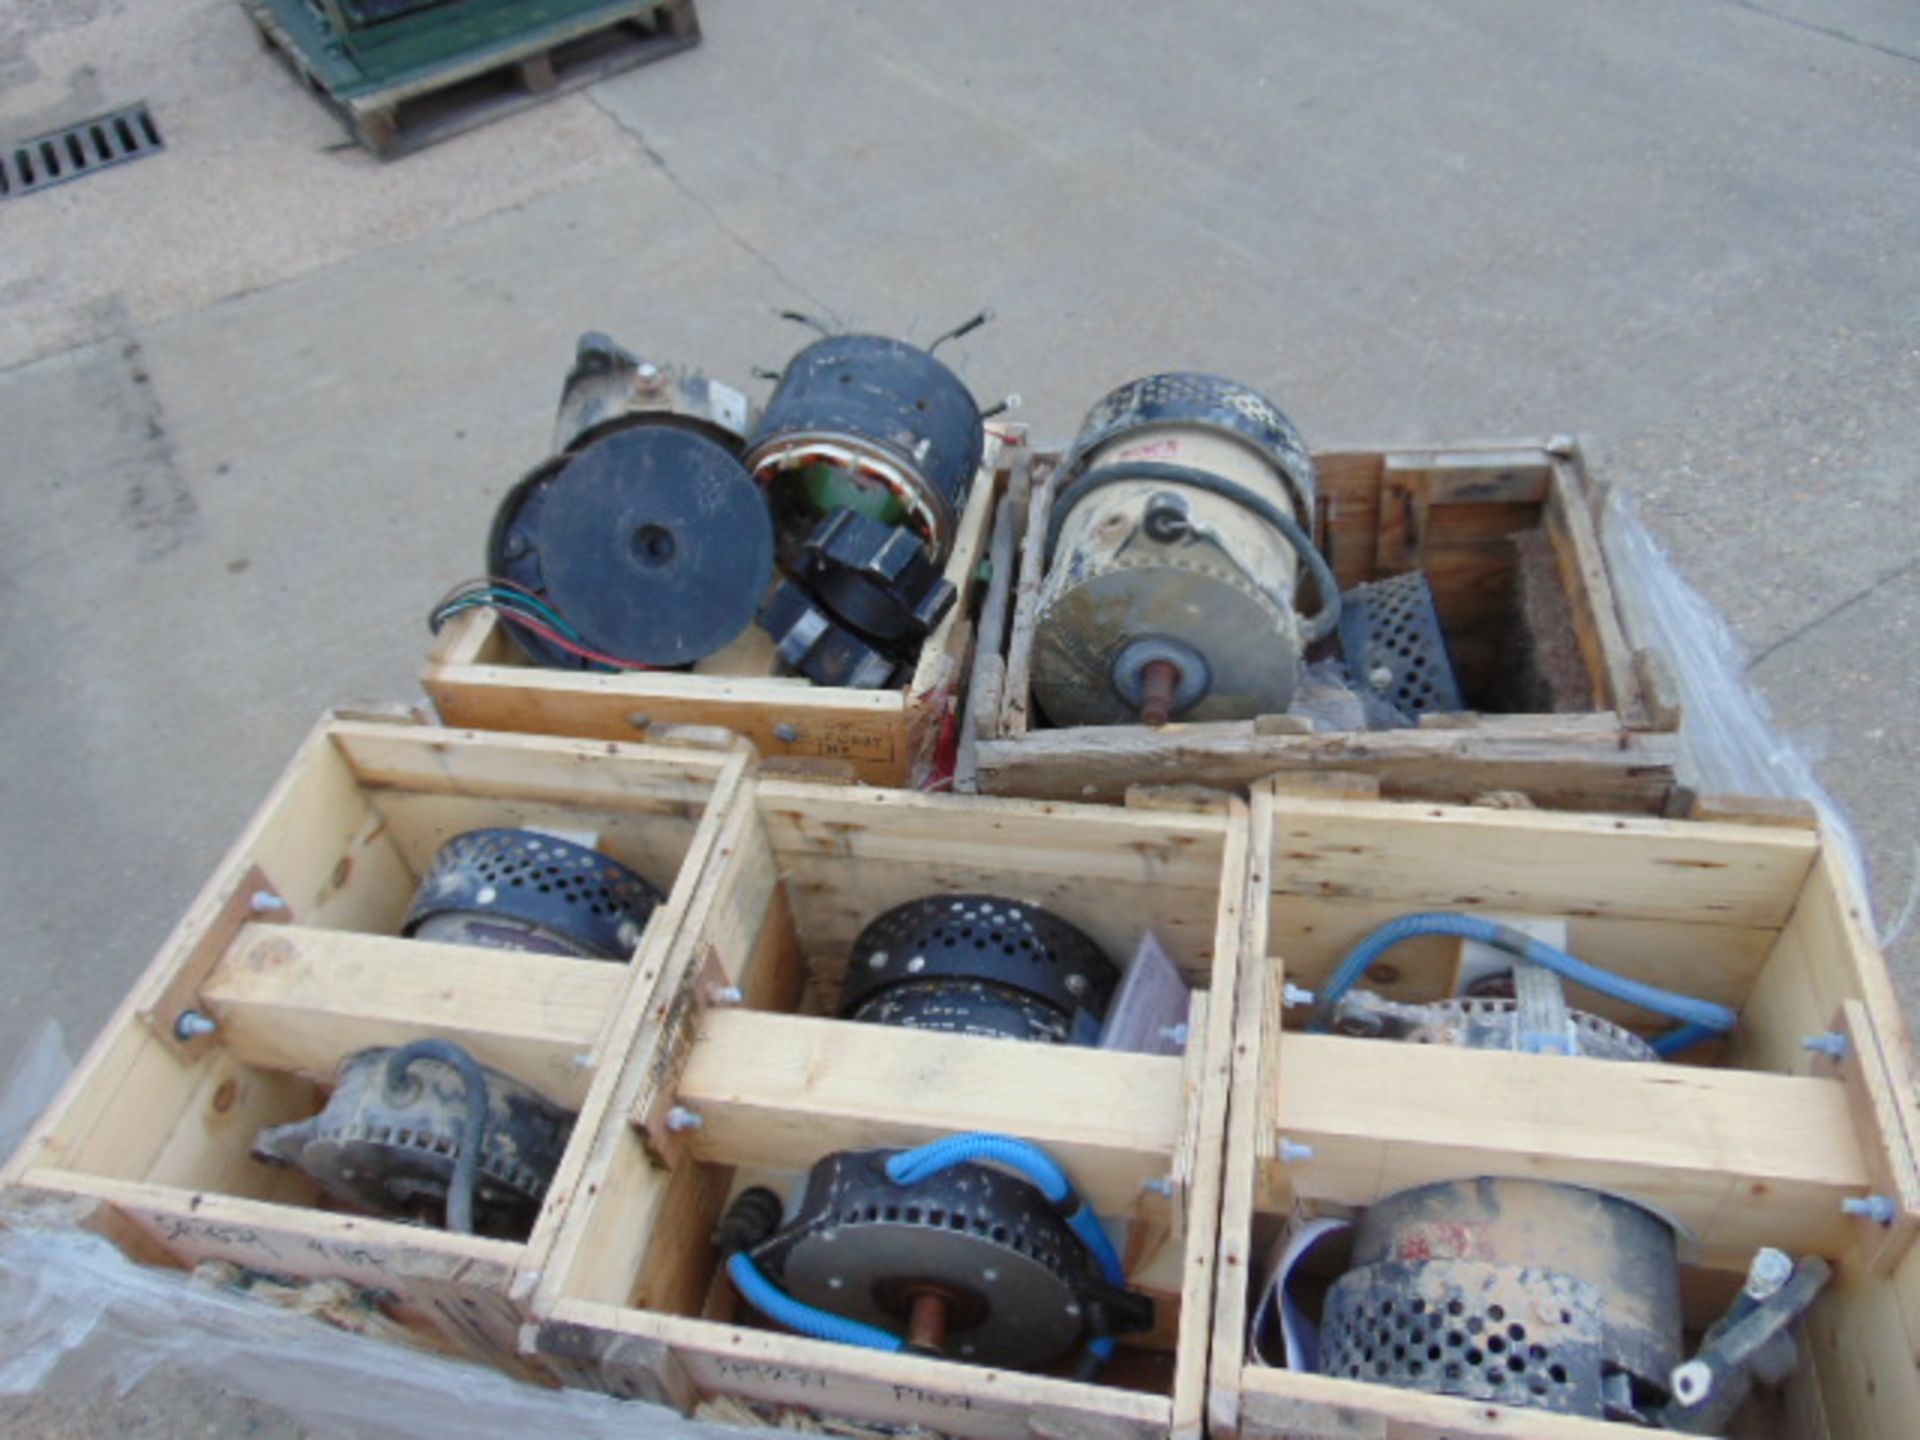 12 x Takeout Alternators for Combat Liasion Vehicle - Image 4 of 7